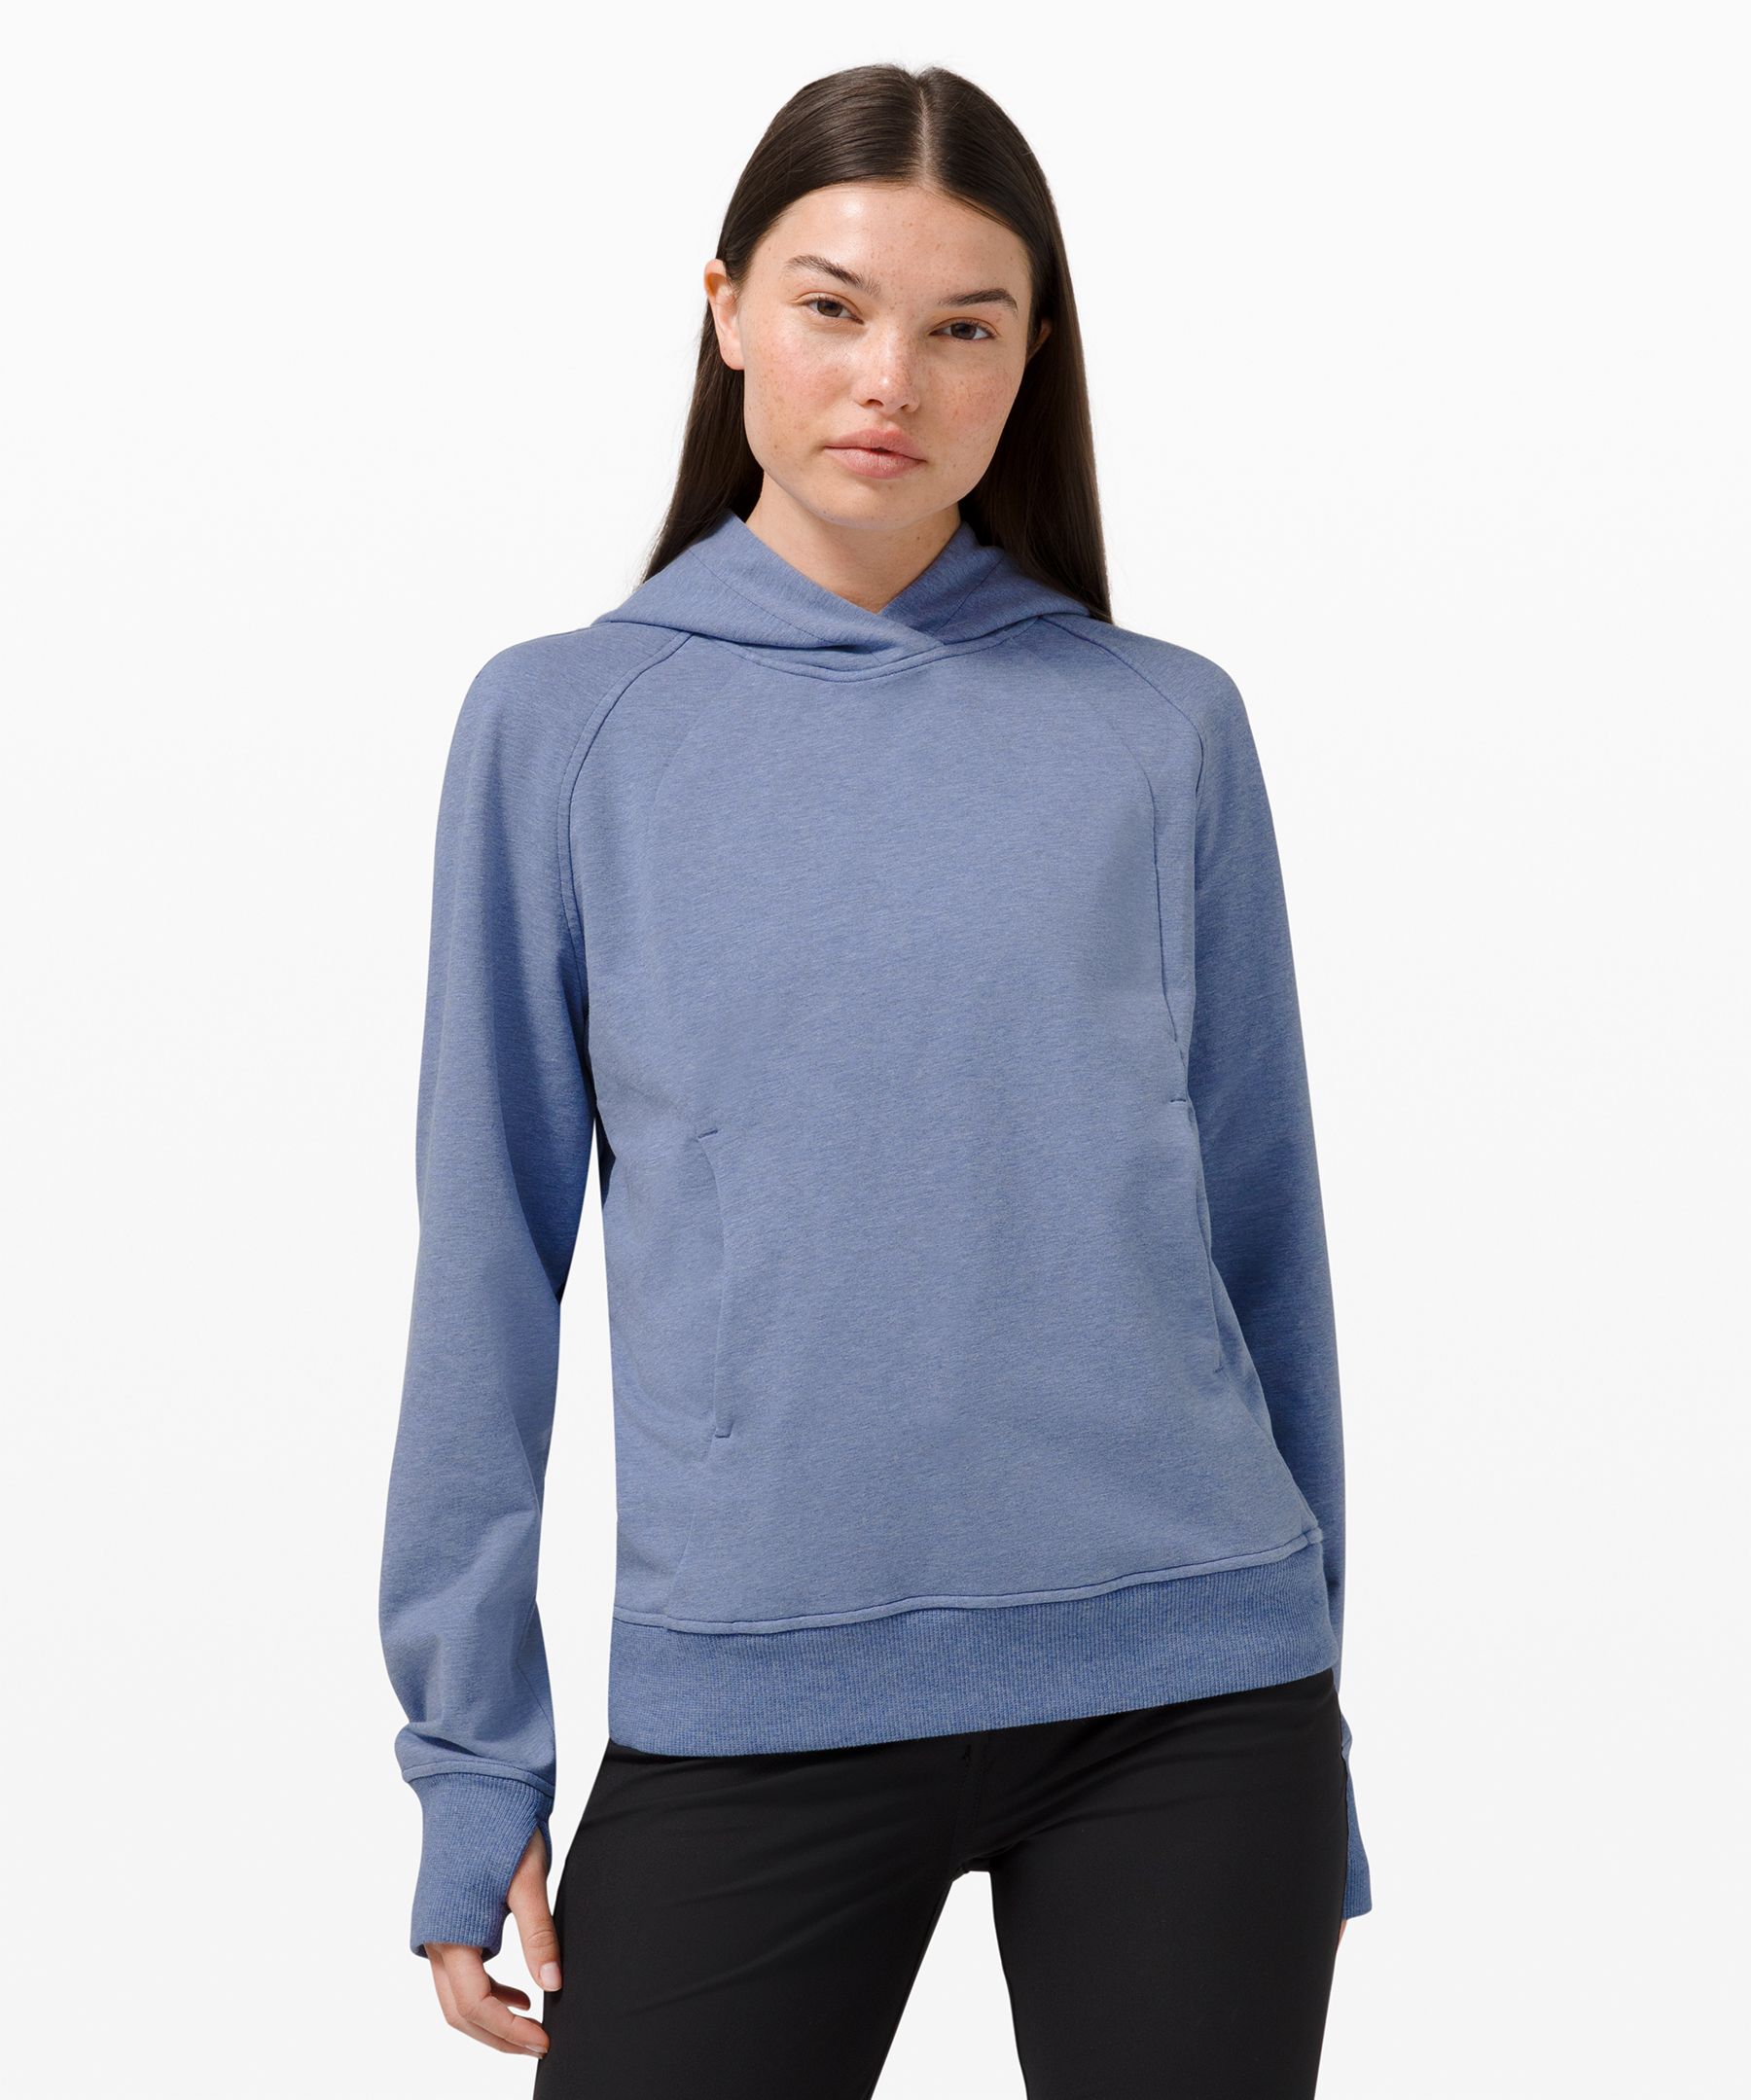 Lululemon Scuba Pullover *online Only In Heathered Water Drop